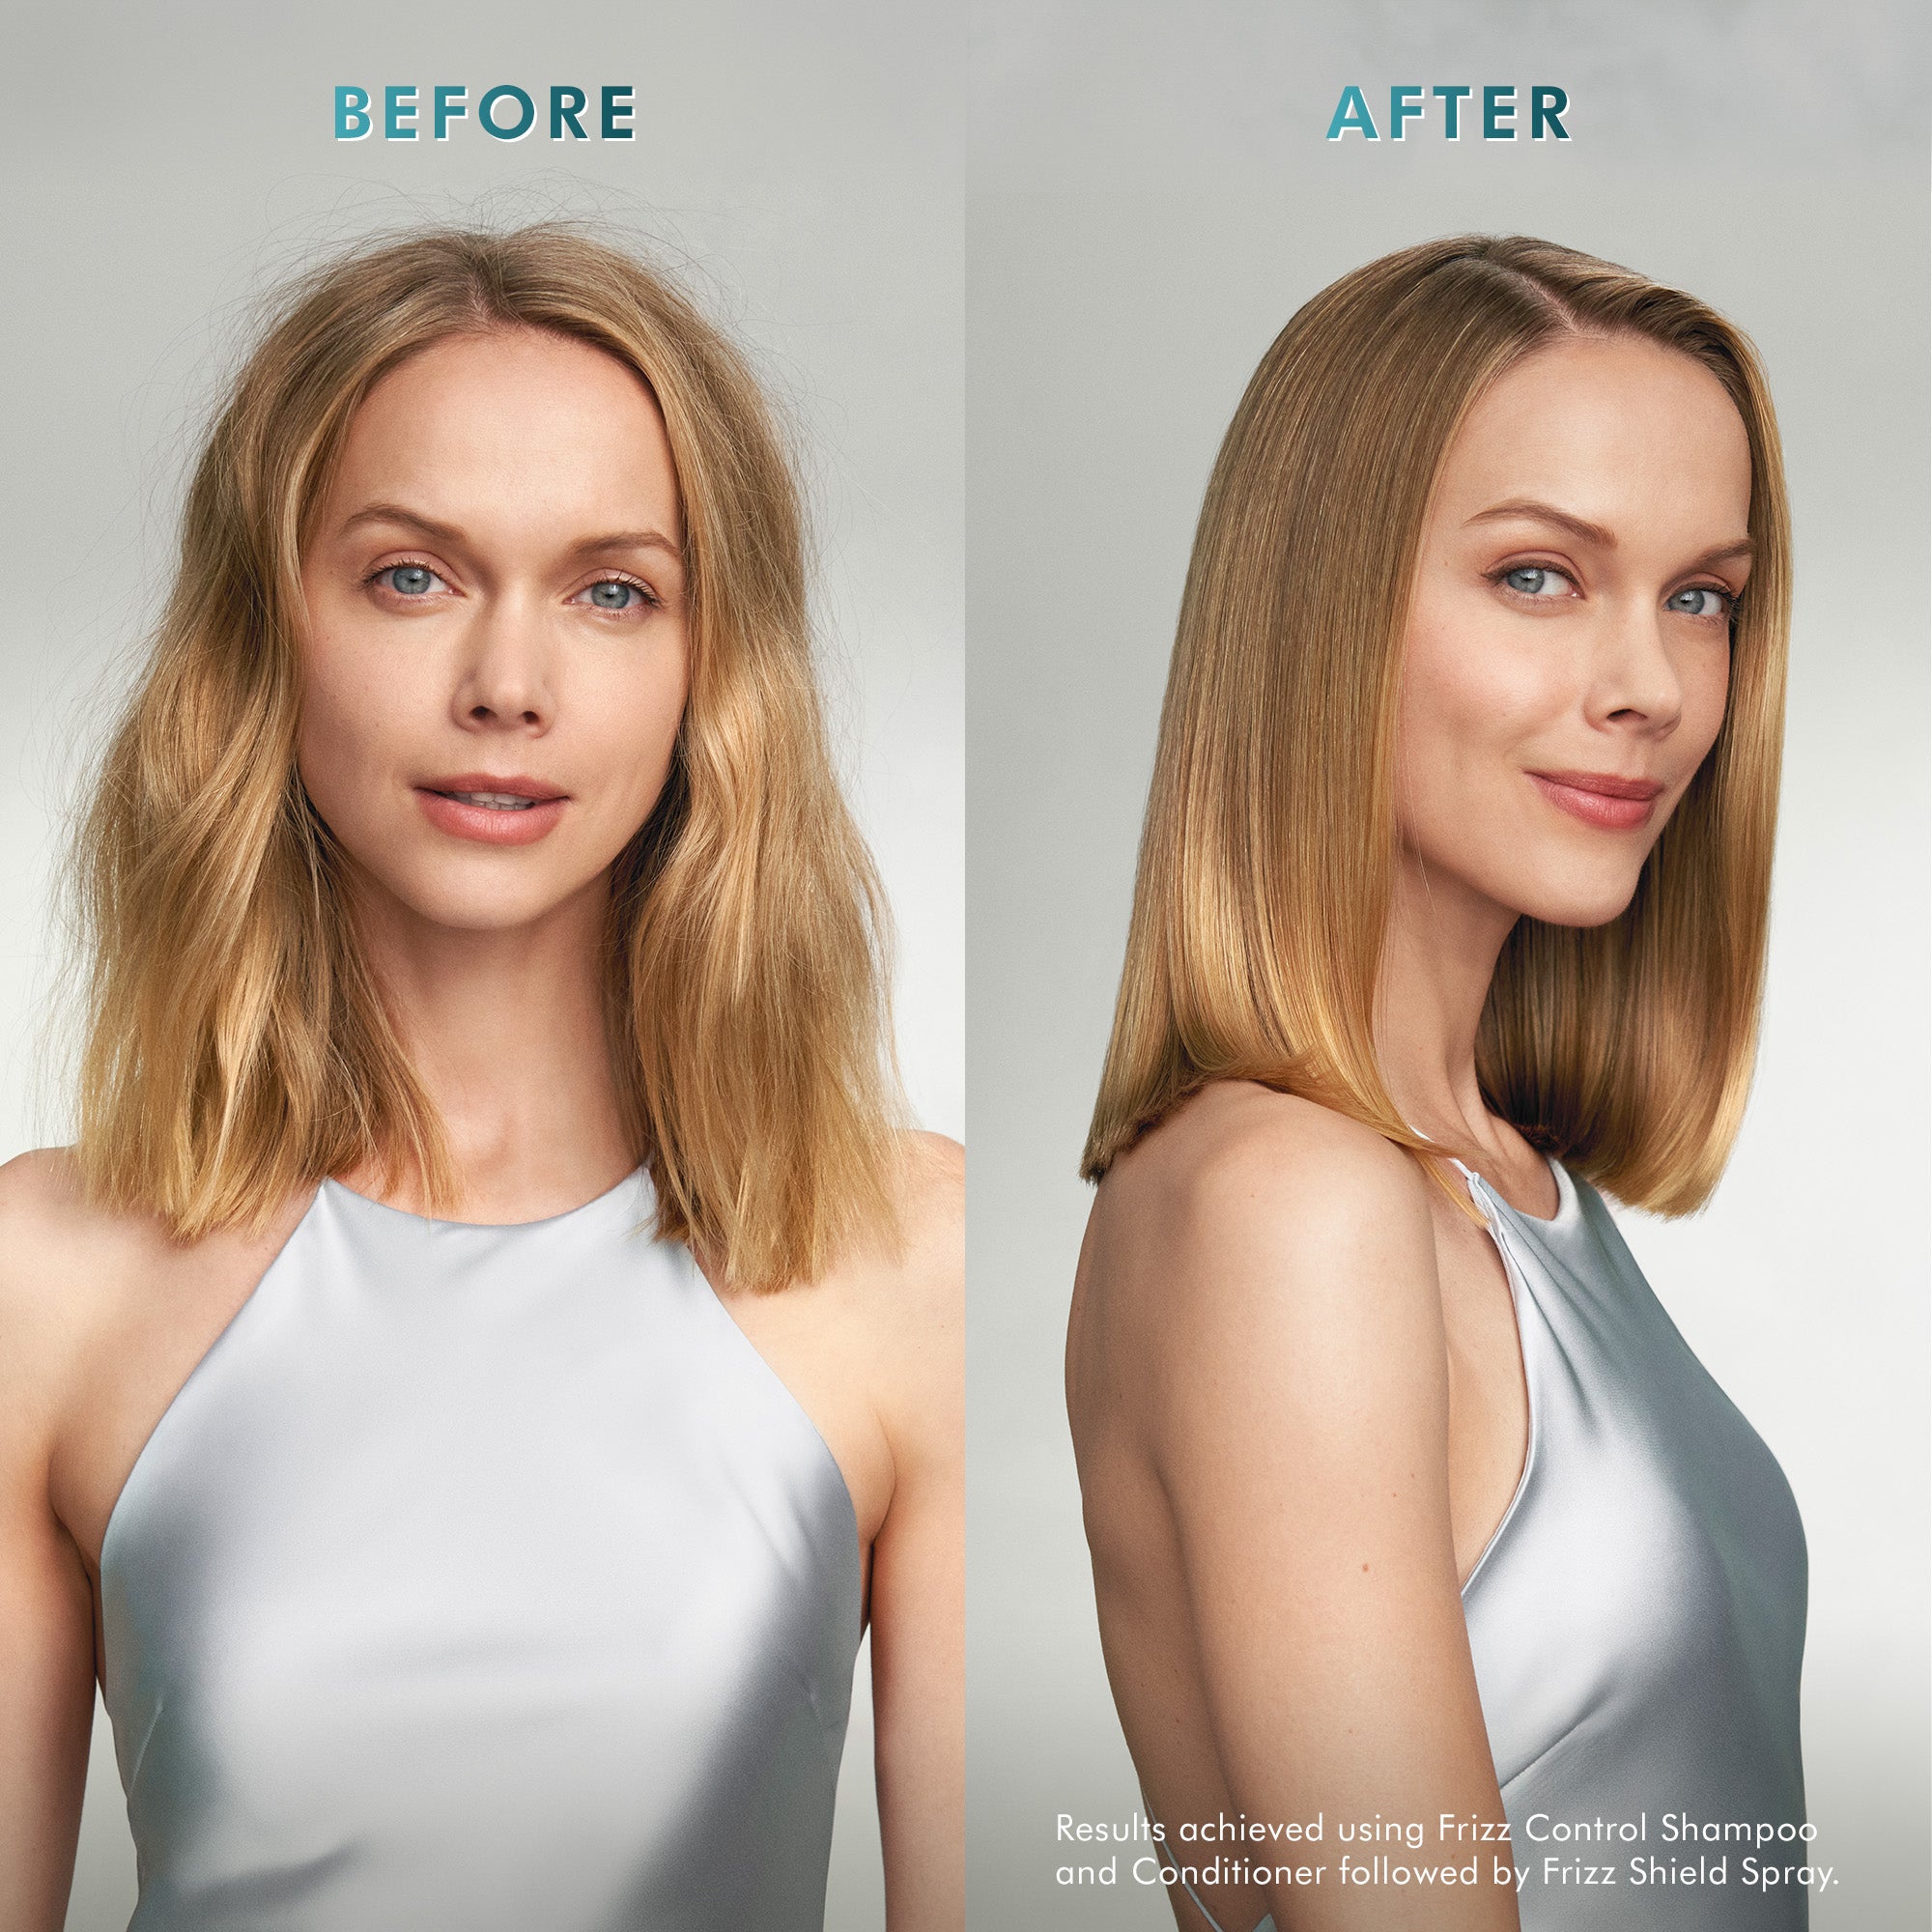 Frizz Control Shampoo and Conditioner Before and After model images